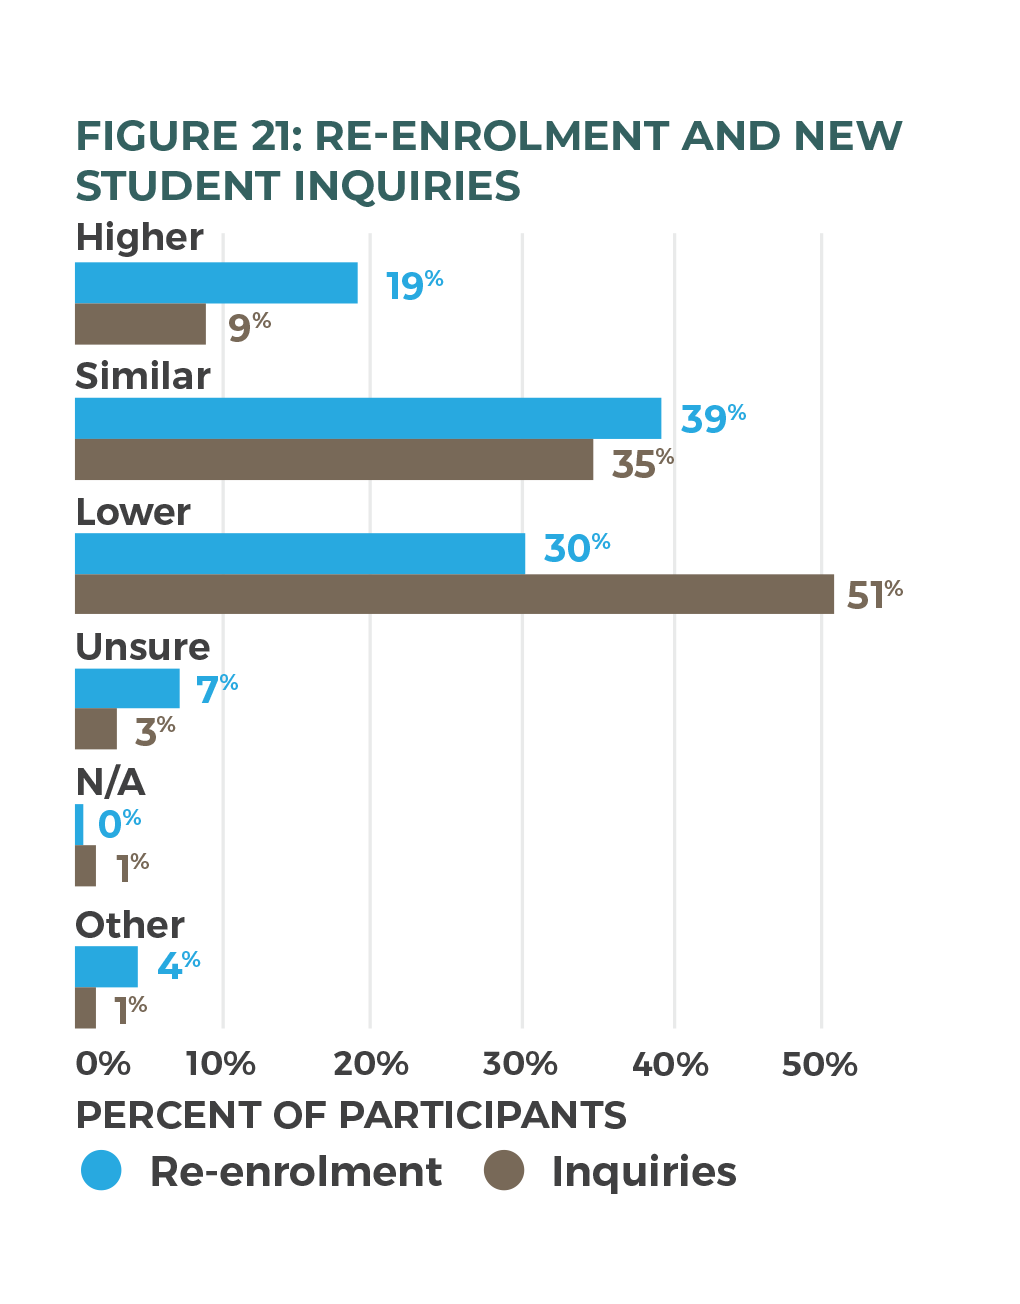 Figure 21: Re-enrolment and new student inquiries